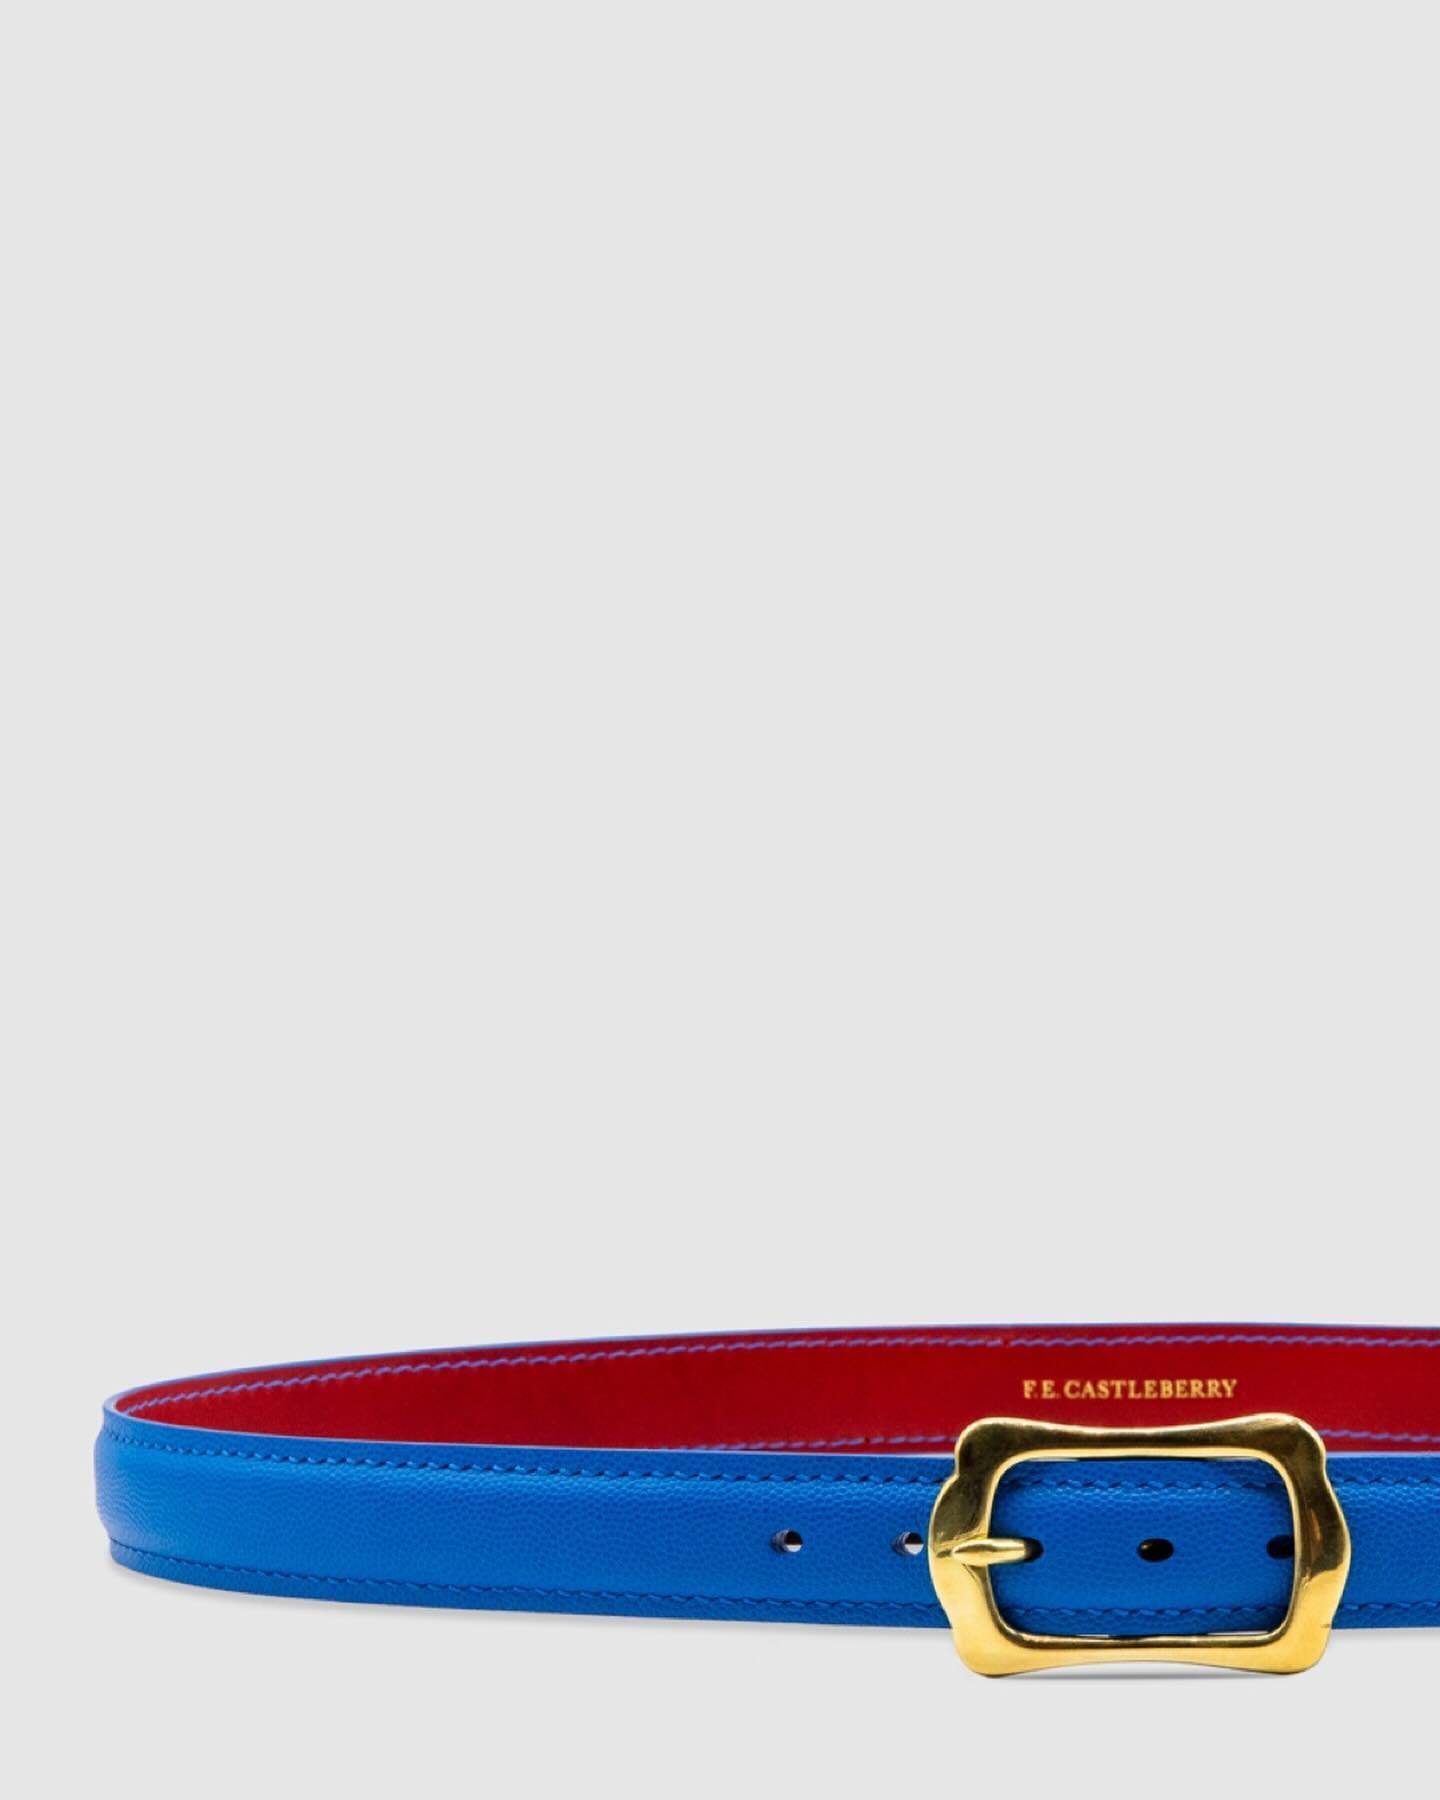 CROWN BUCKLE BELT

French caviar leather. English brass buckle. American spirit.

Made to order by hand in New York. 1&rdquo; wide. $850.